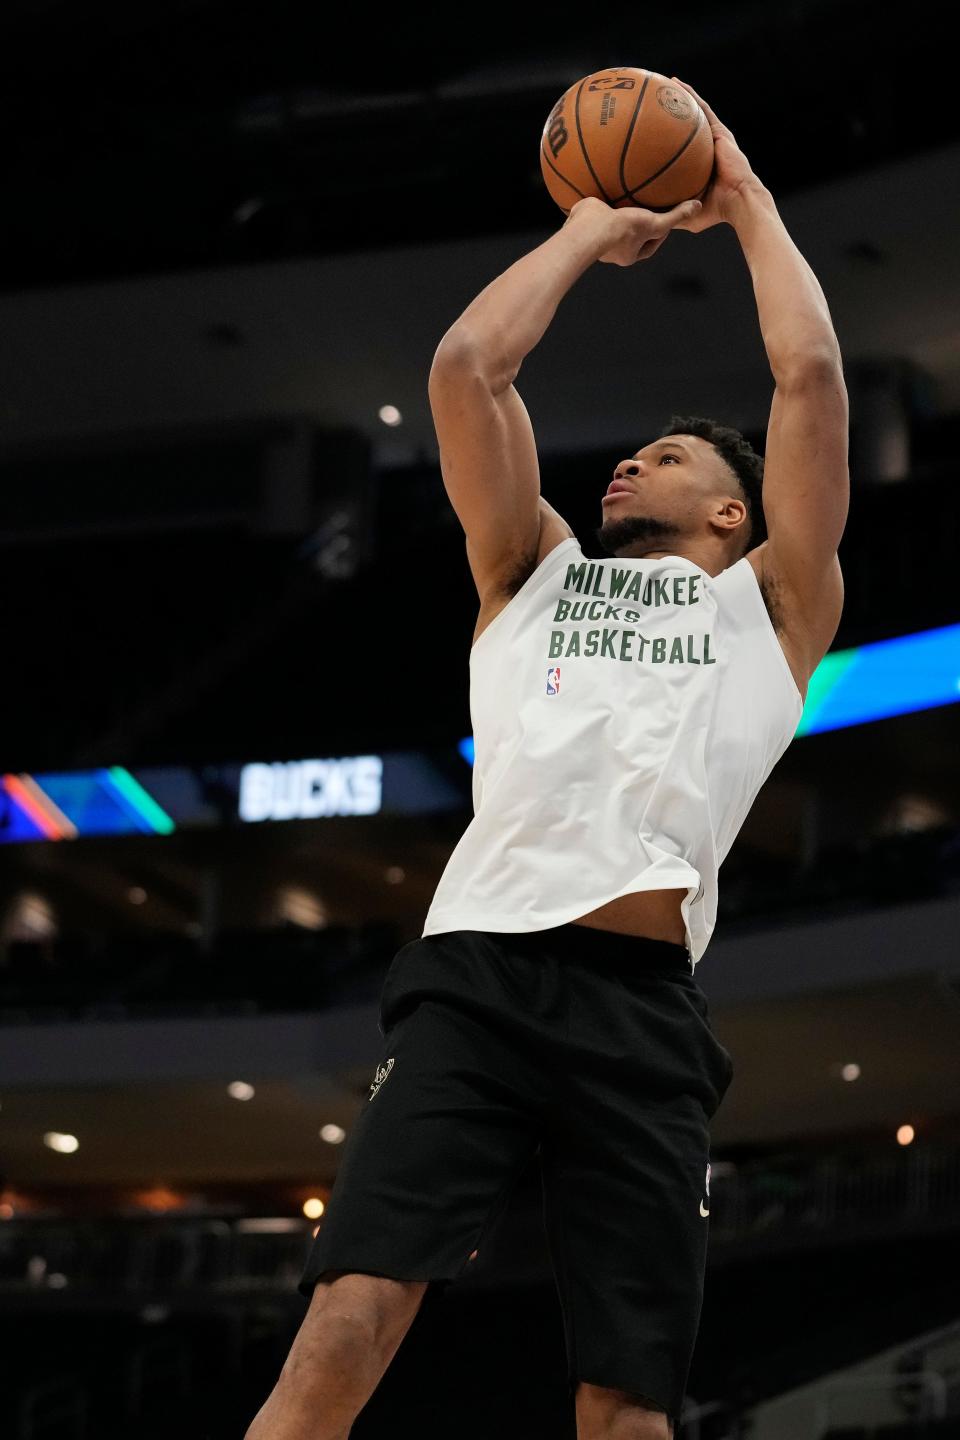 Giannis Antetokounmpo warms up before Milwaukee's game against Phoenix at Fiserv Forum on Sunday. He did not play though.